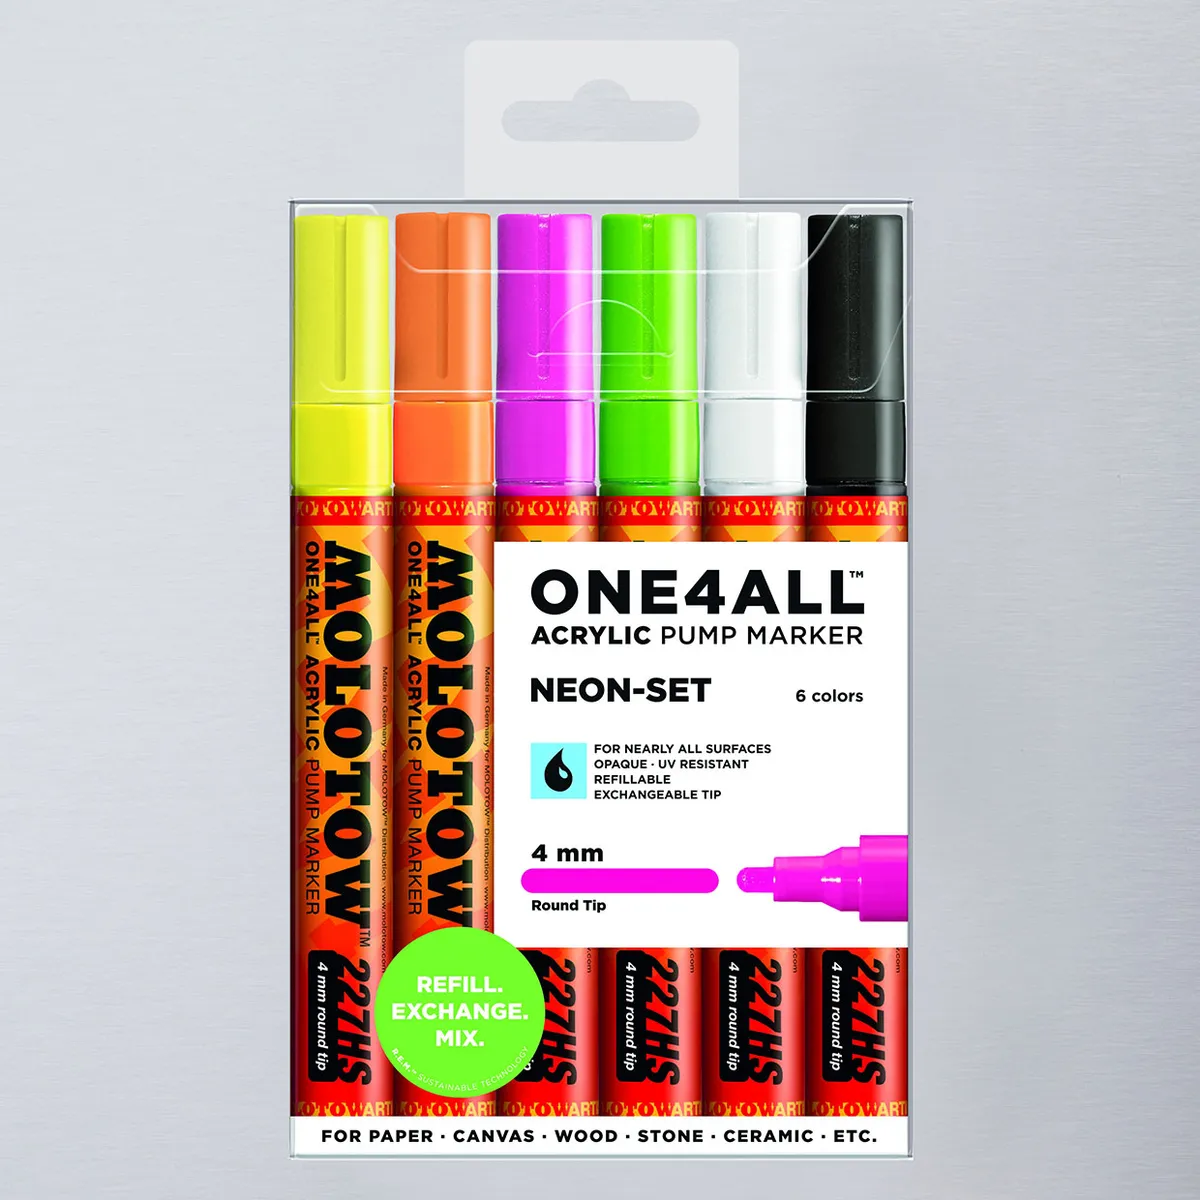 How to use paint markers – Molotow One4all neon markers